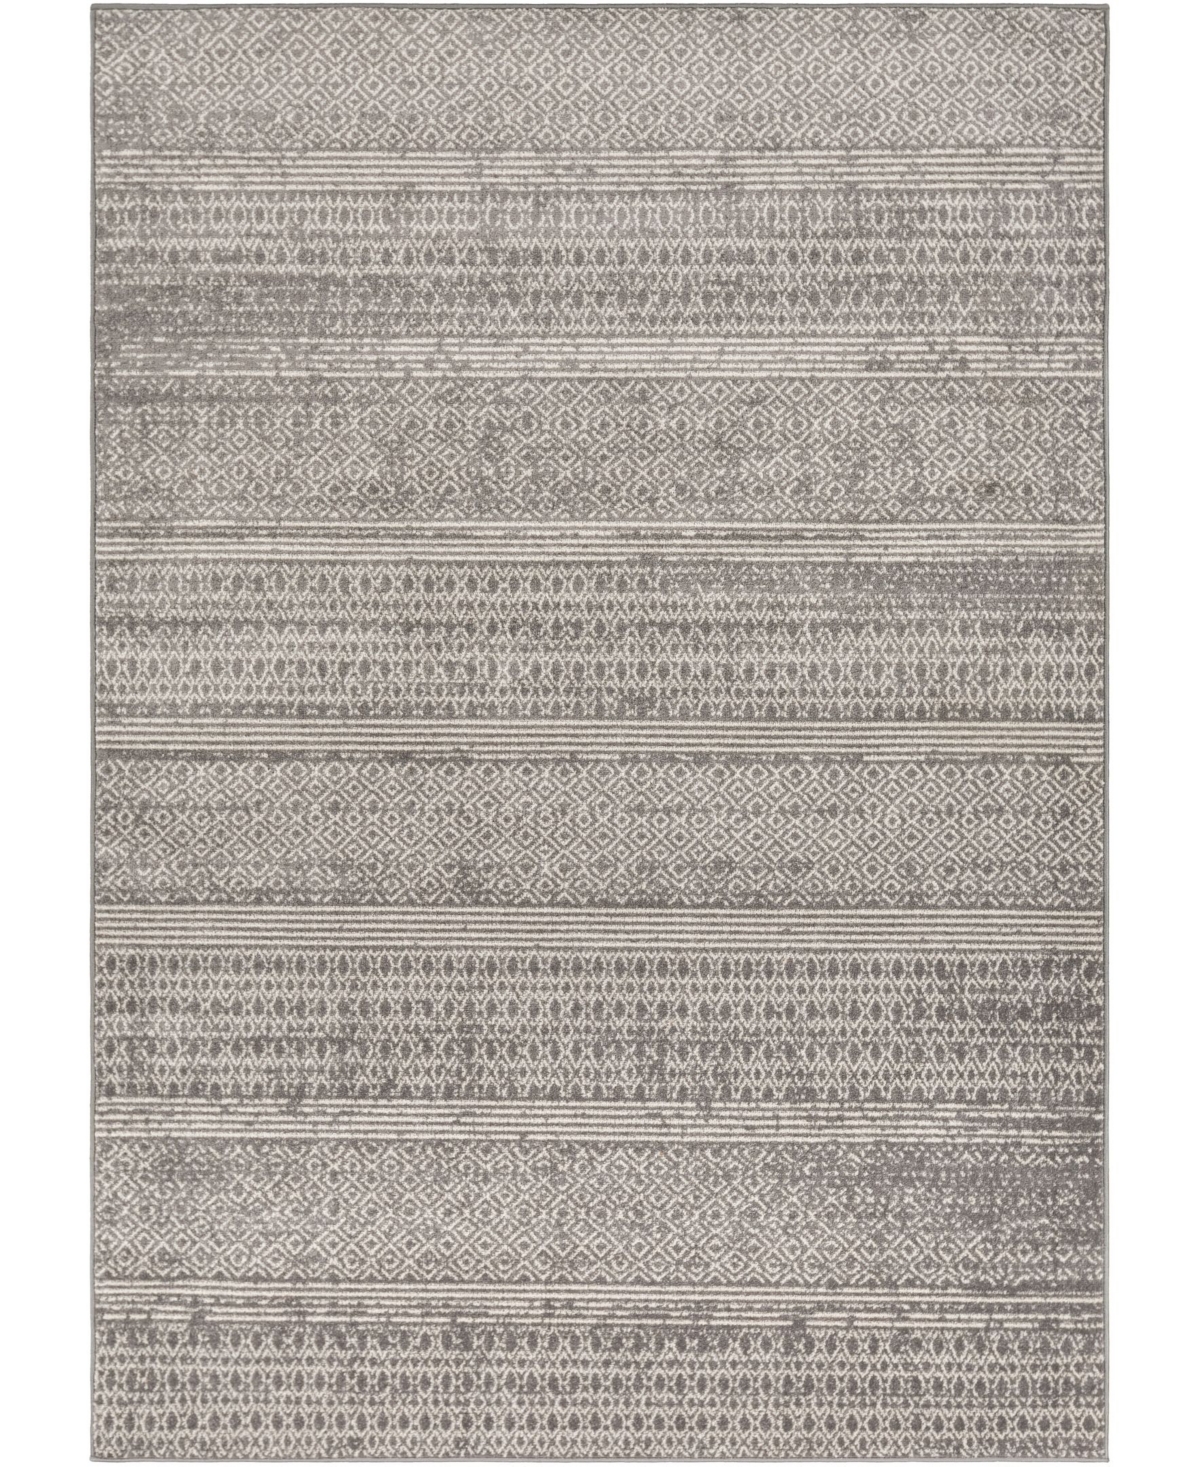 Surya Chester Che-2304 6'7in x 9' Area Rug - Gray